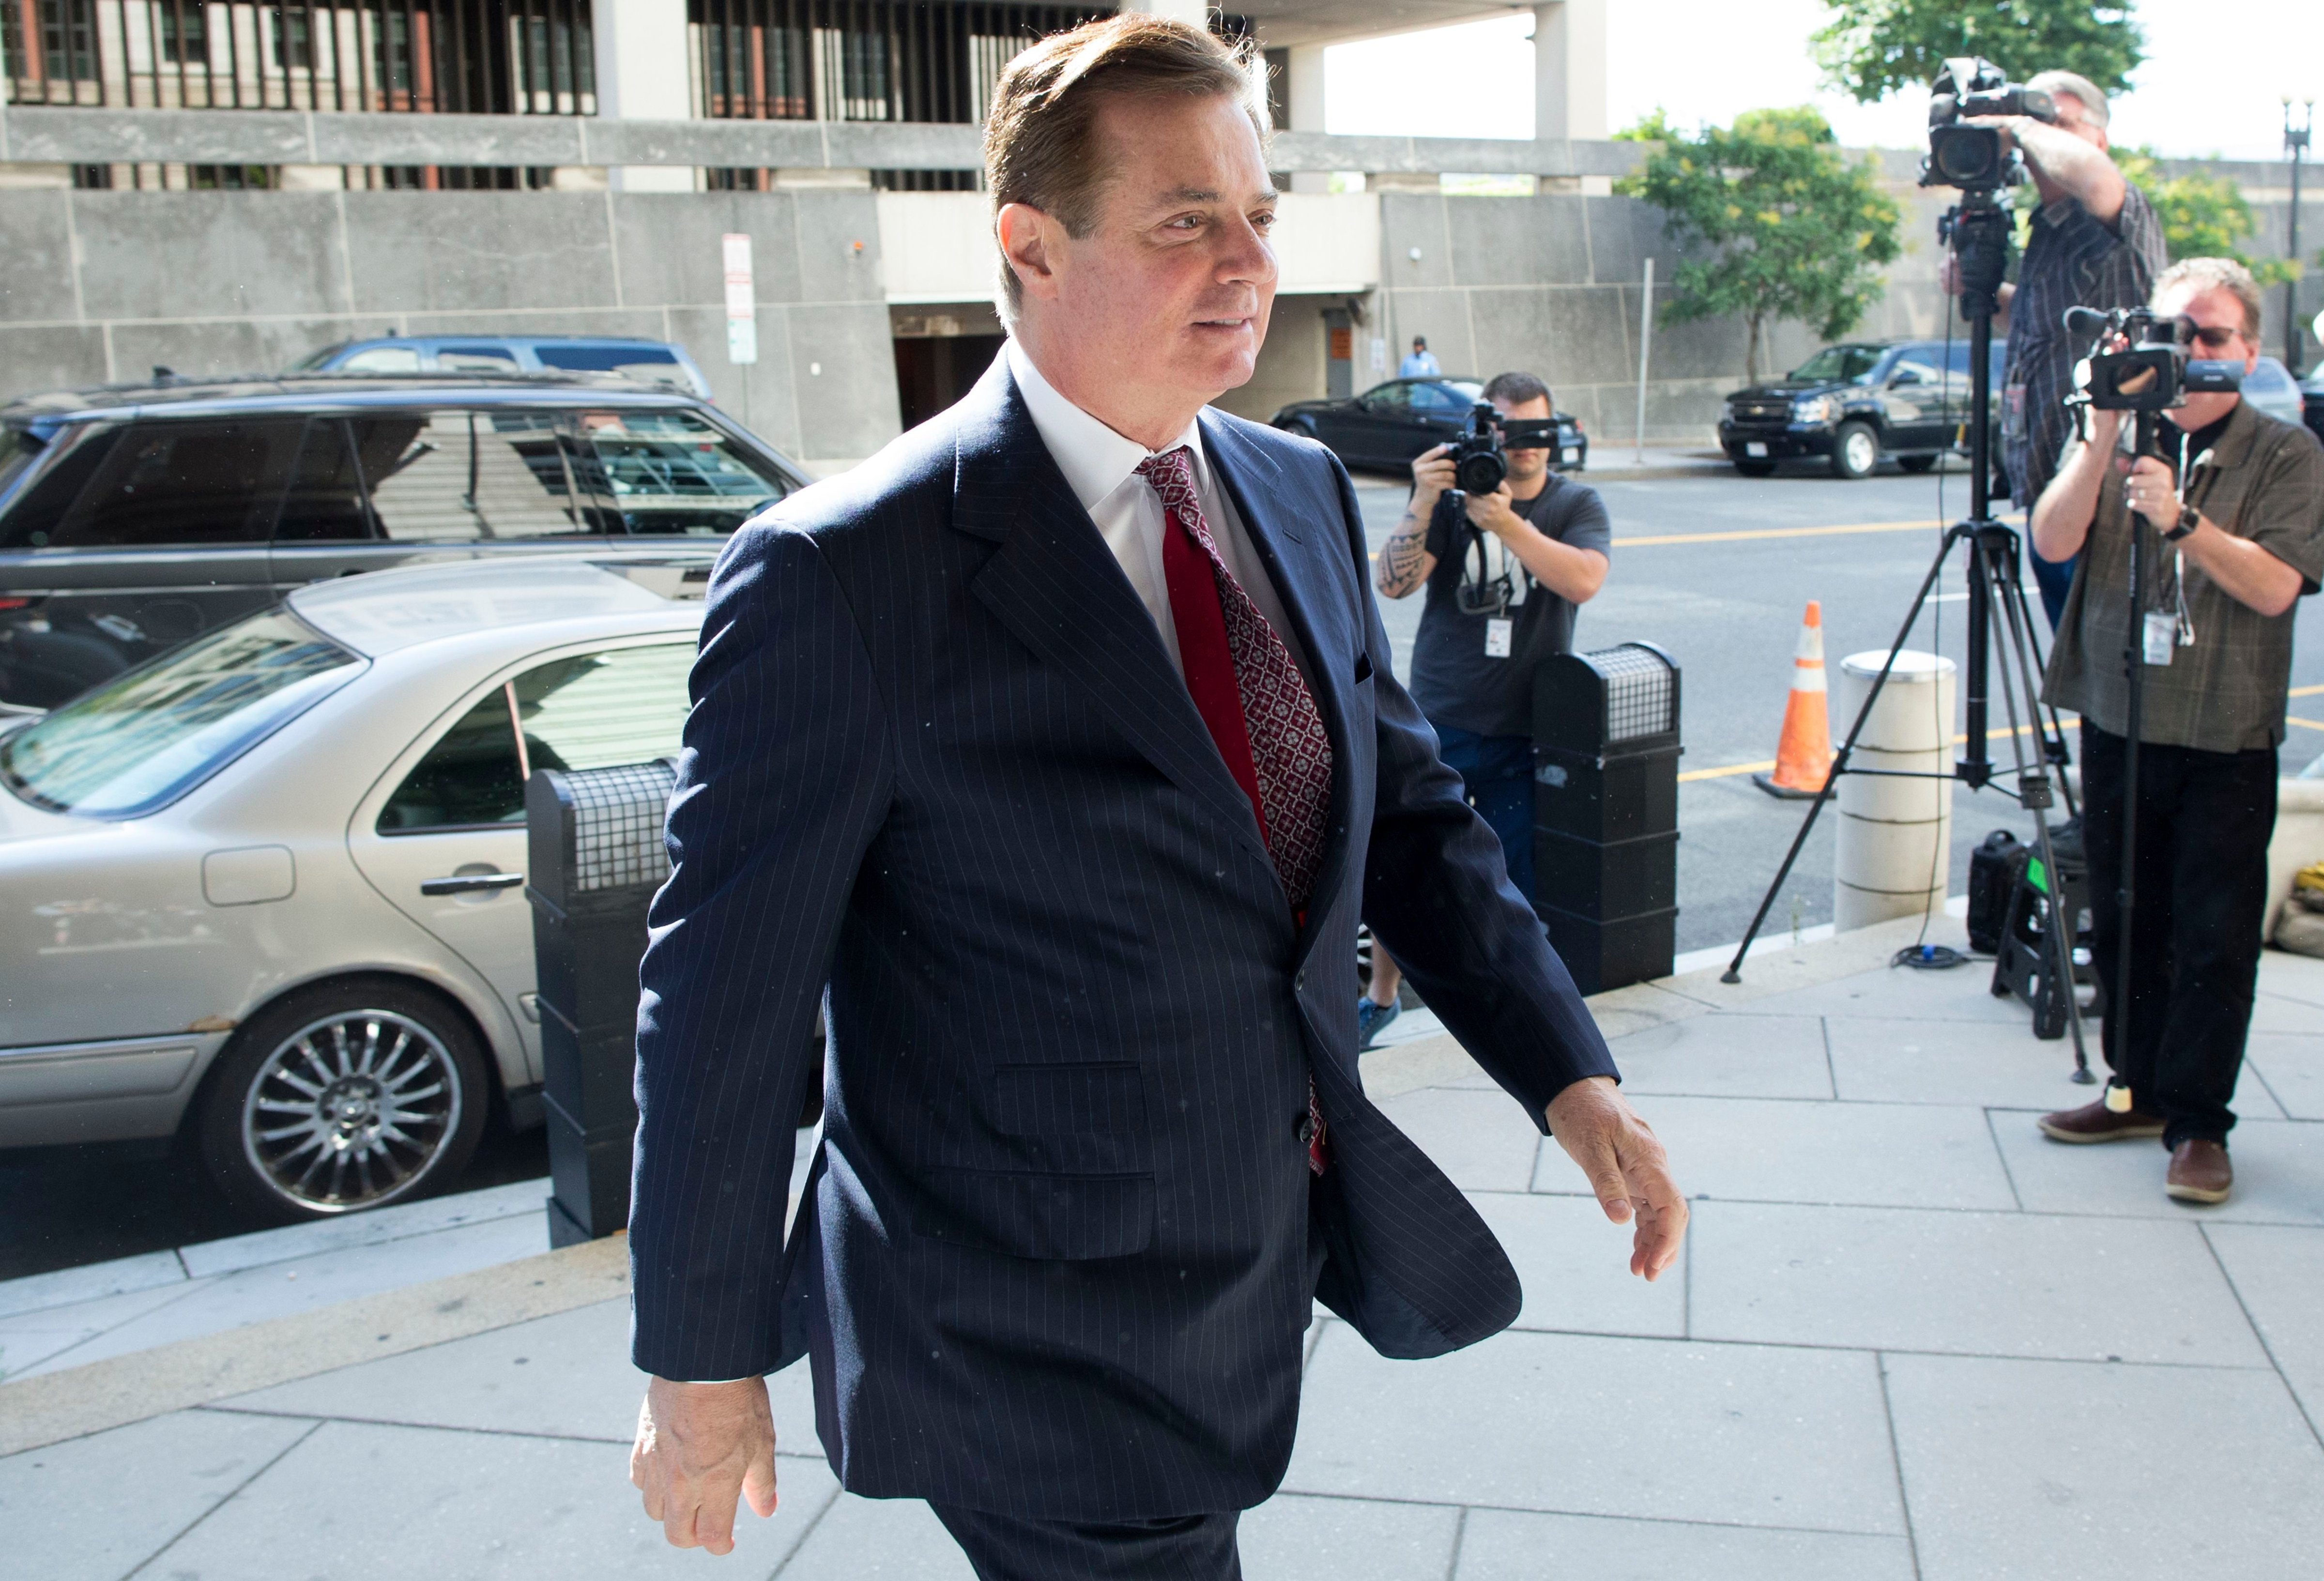 Former Trump campaign chairman Paul Manafort arrives at the Federal Courthouse in Washington, DC, USA, 15 June 2018. Manafort is accused of witness tampering and the office of US Special Counsel Robert Mueller has asked a federal judge to revoke his bail before a trial this autumn.
                      Former Trump Campaign Manager Paul Manafort, Washington, USA - 15 Jun 2018 (Michael Reynolds—EPA-EFE/REX/Shutterstock)